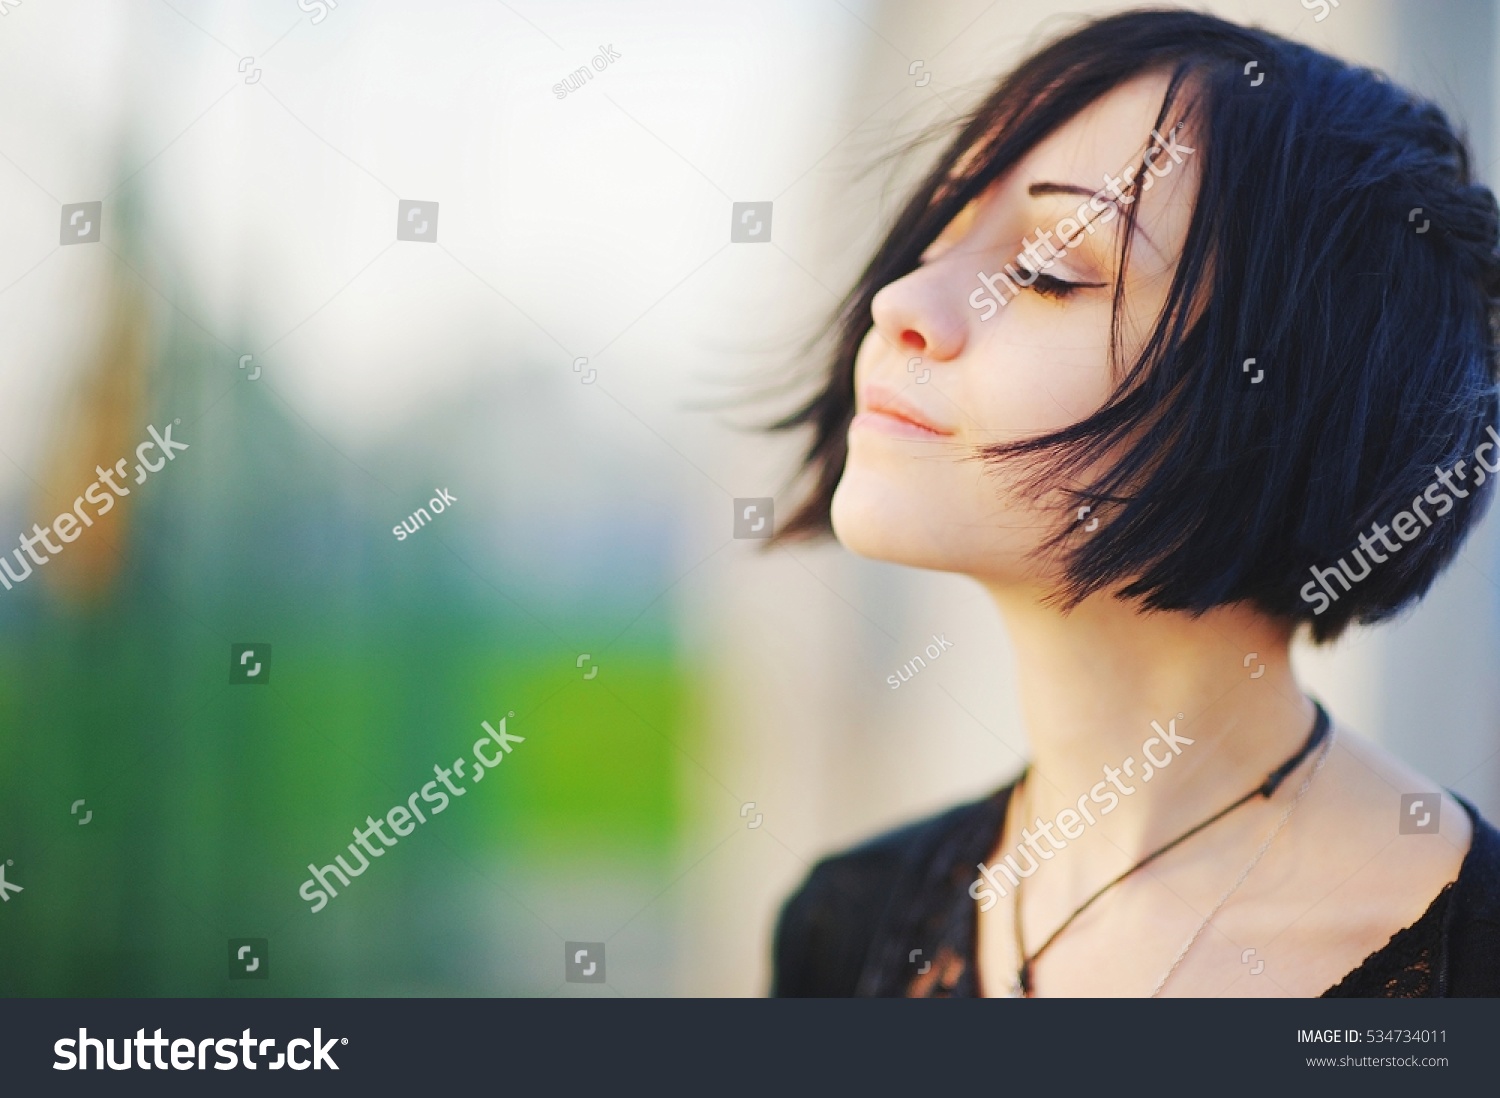 Young beautiful asian brunette woman, eyes closed, enjoying the bright warm day on blurred background close up. Air deep breath, yoga mind zen relax, calm peace pray hope concept. Light skin lady spa. #534734011